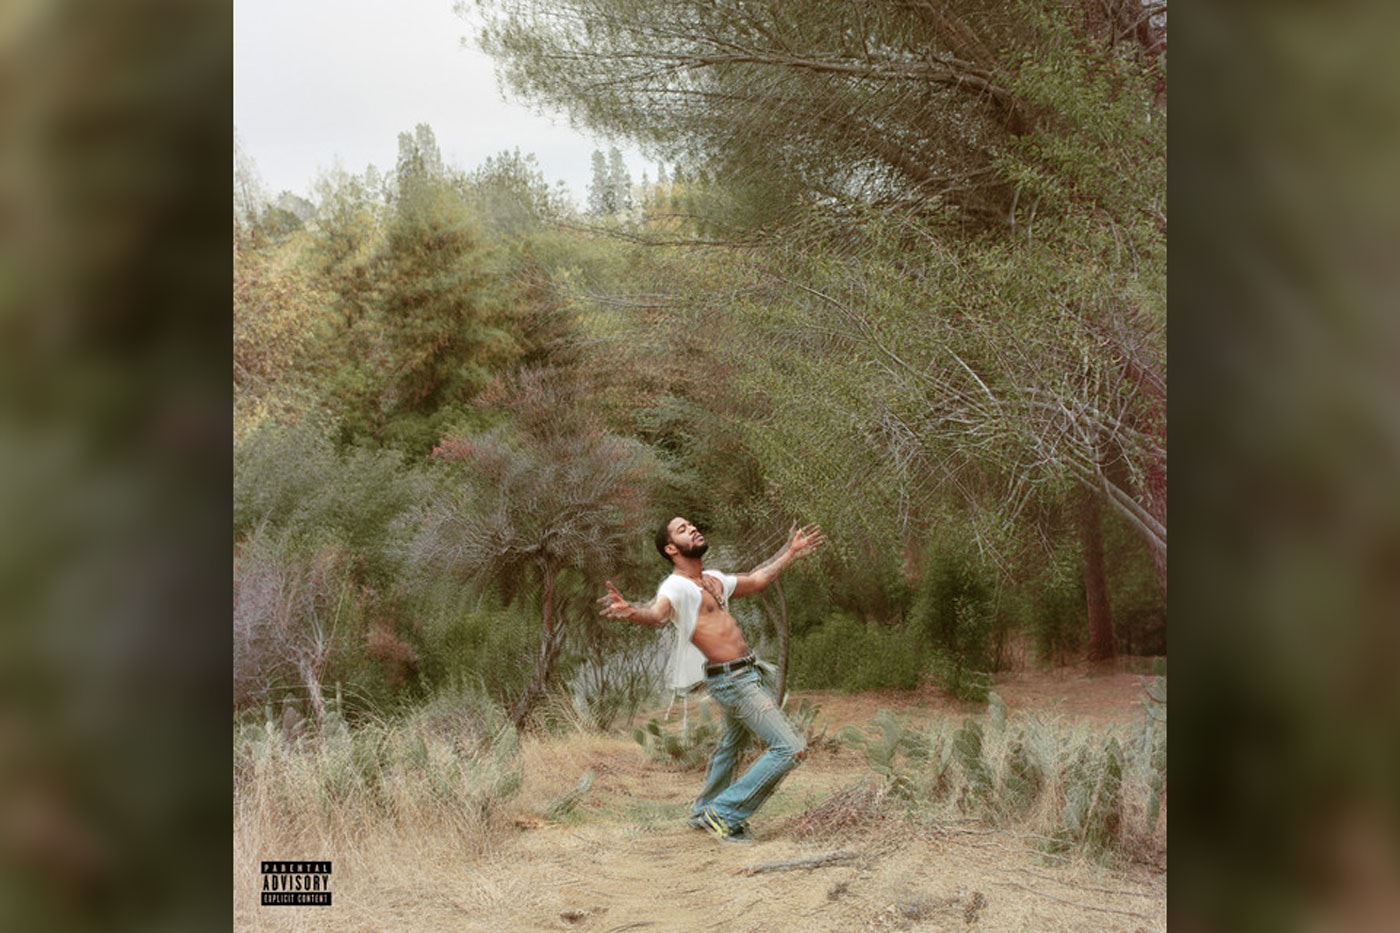 Listen to Kid Cudi's Latest Track "Confused"